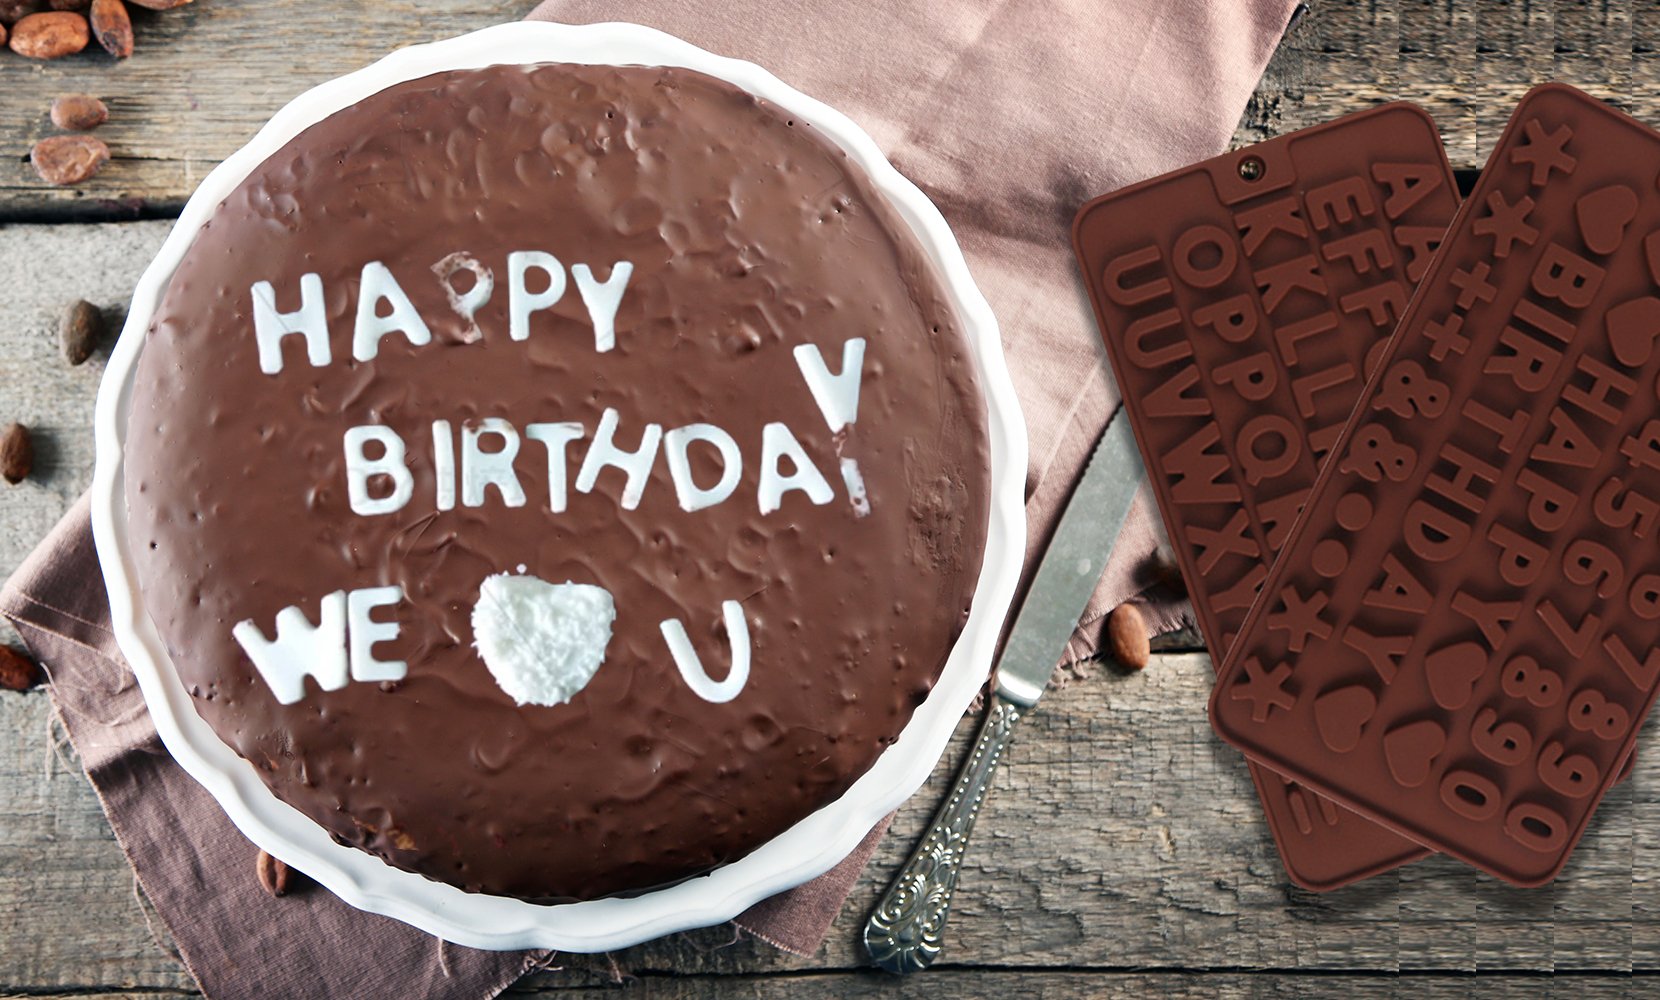 2-Pack: Silicone Chocolate Ice Decoration Tray  For Happy Birthday, Numbers, Symbols Mold